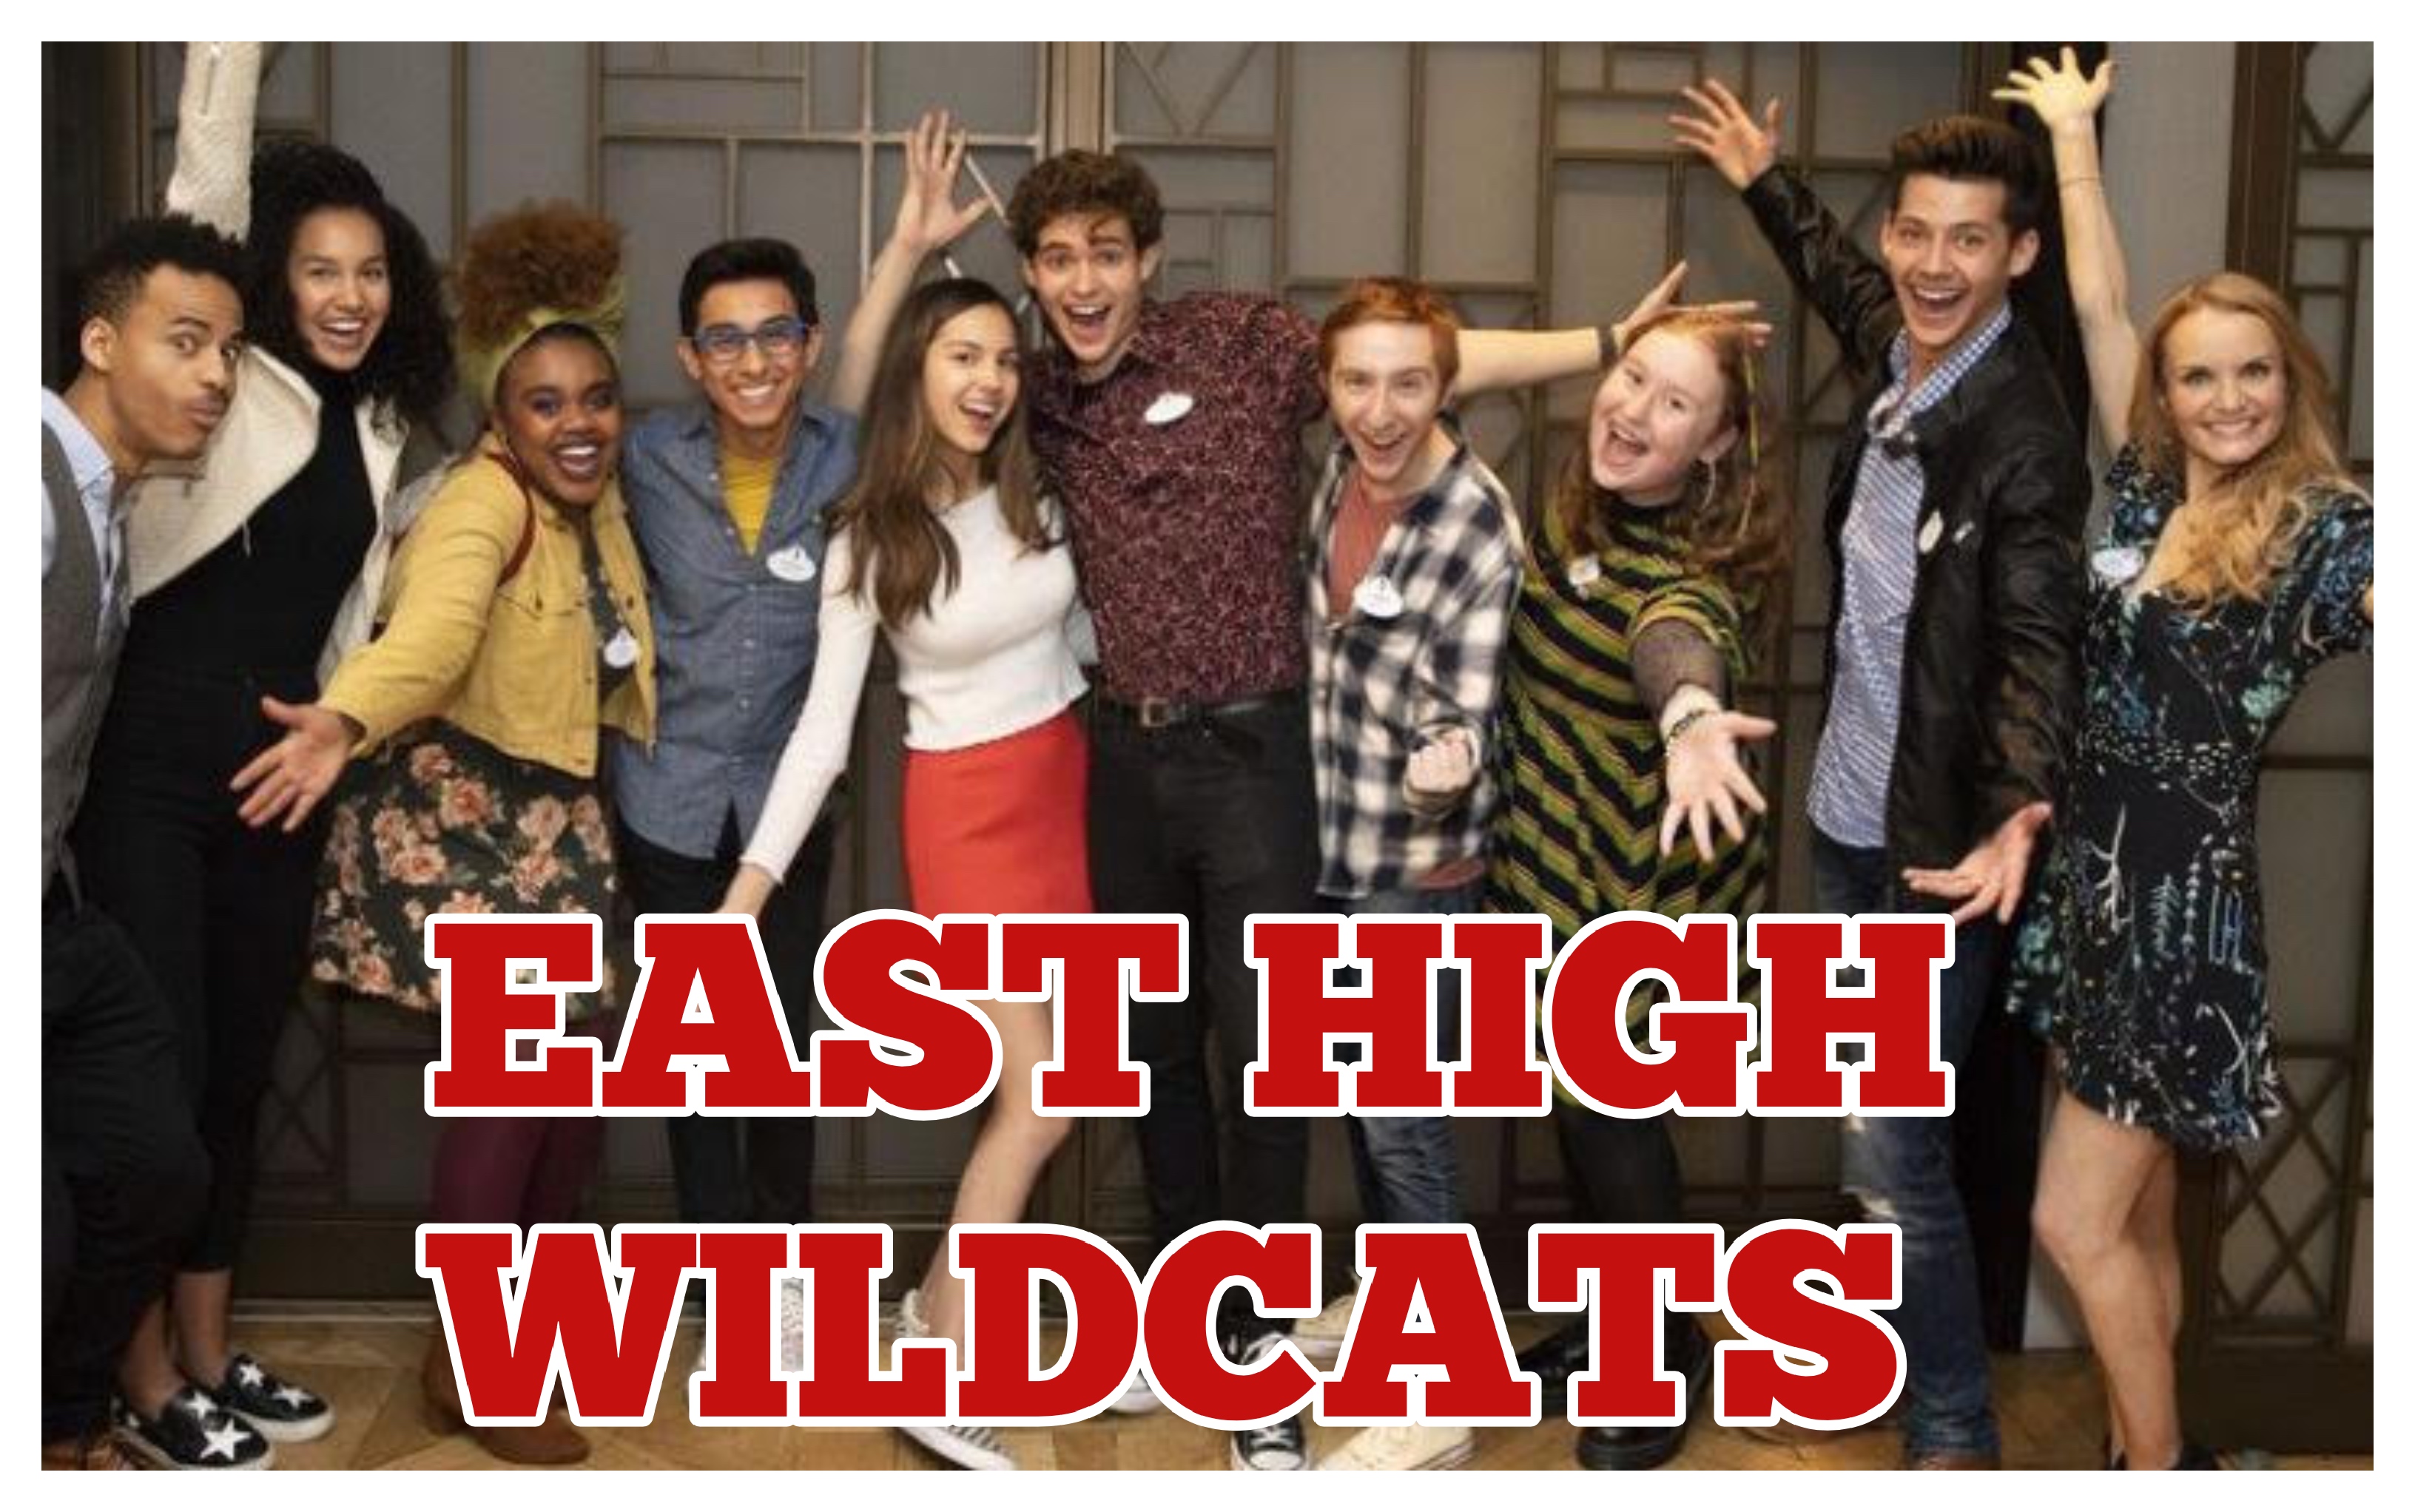 Meet the Cast of Disney+ Series ‘High School Musical: The Musical: The Series’